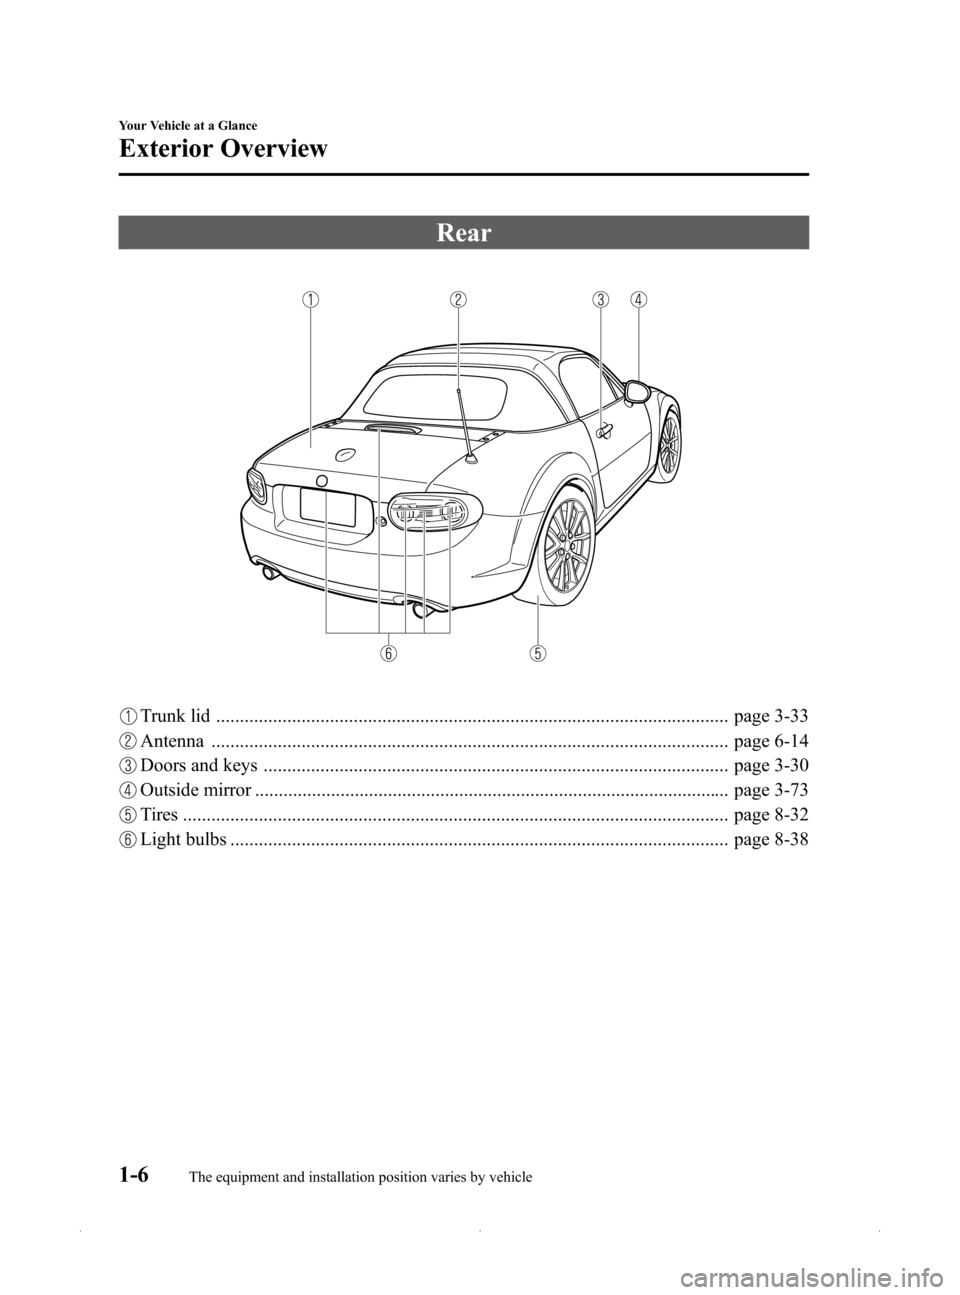 MAZDA MODEL MX-5 PRHT 2015   (in English) User Guide Black plate (12,1)
Rear
Trunk lid ............................................................................................................ page 3-33
Antenna .......................................